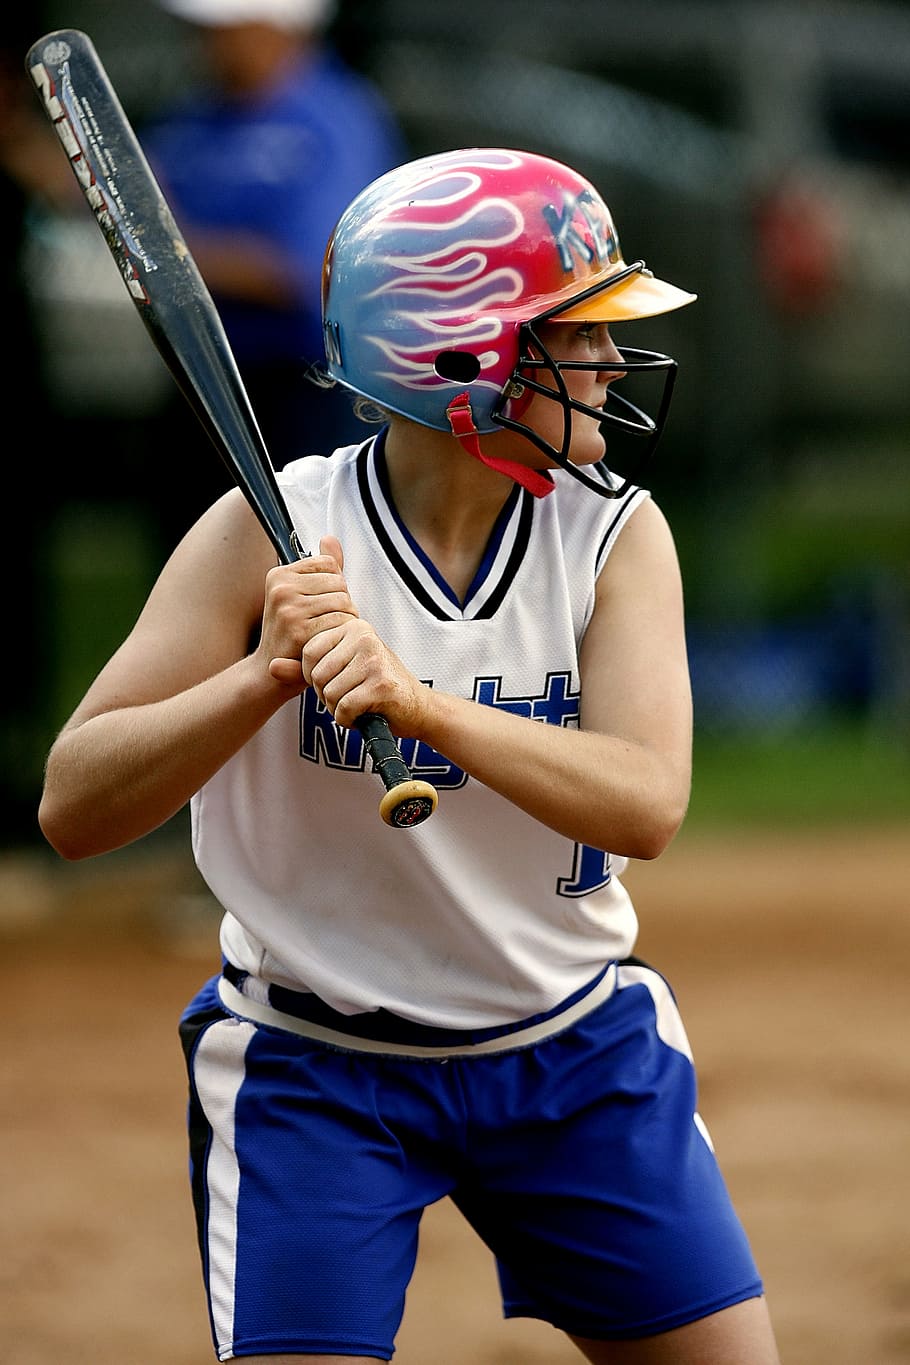 softball, batter, female, player, sport, game, batting, action, competition, teen